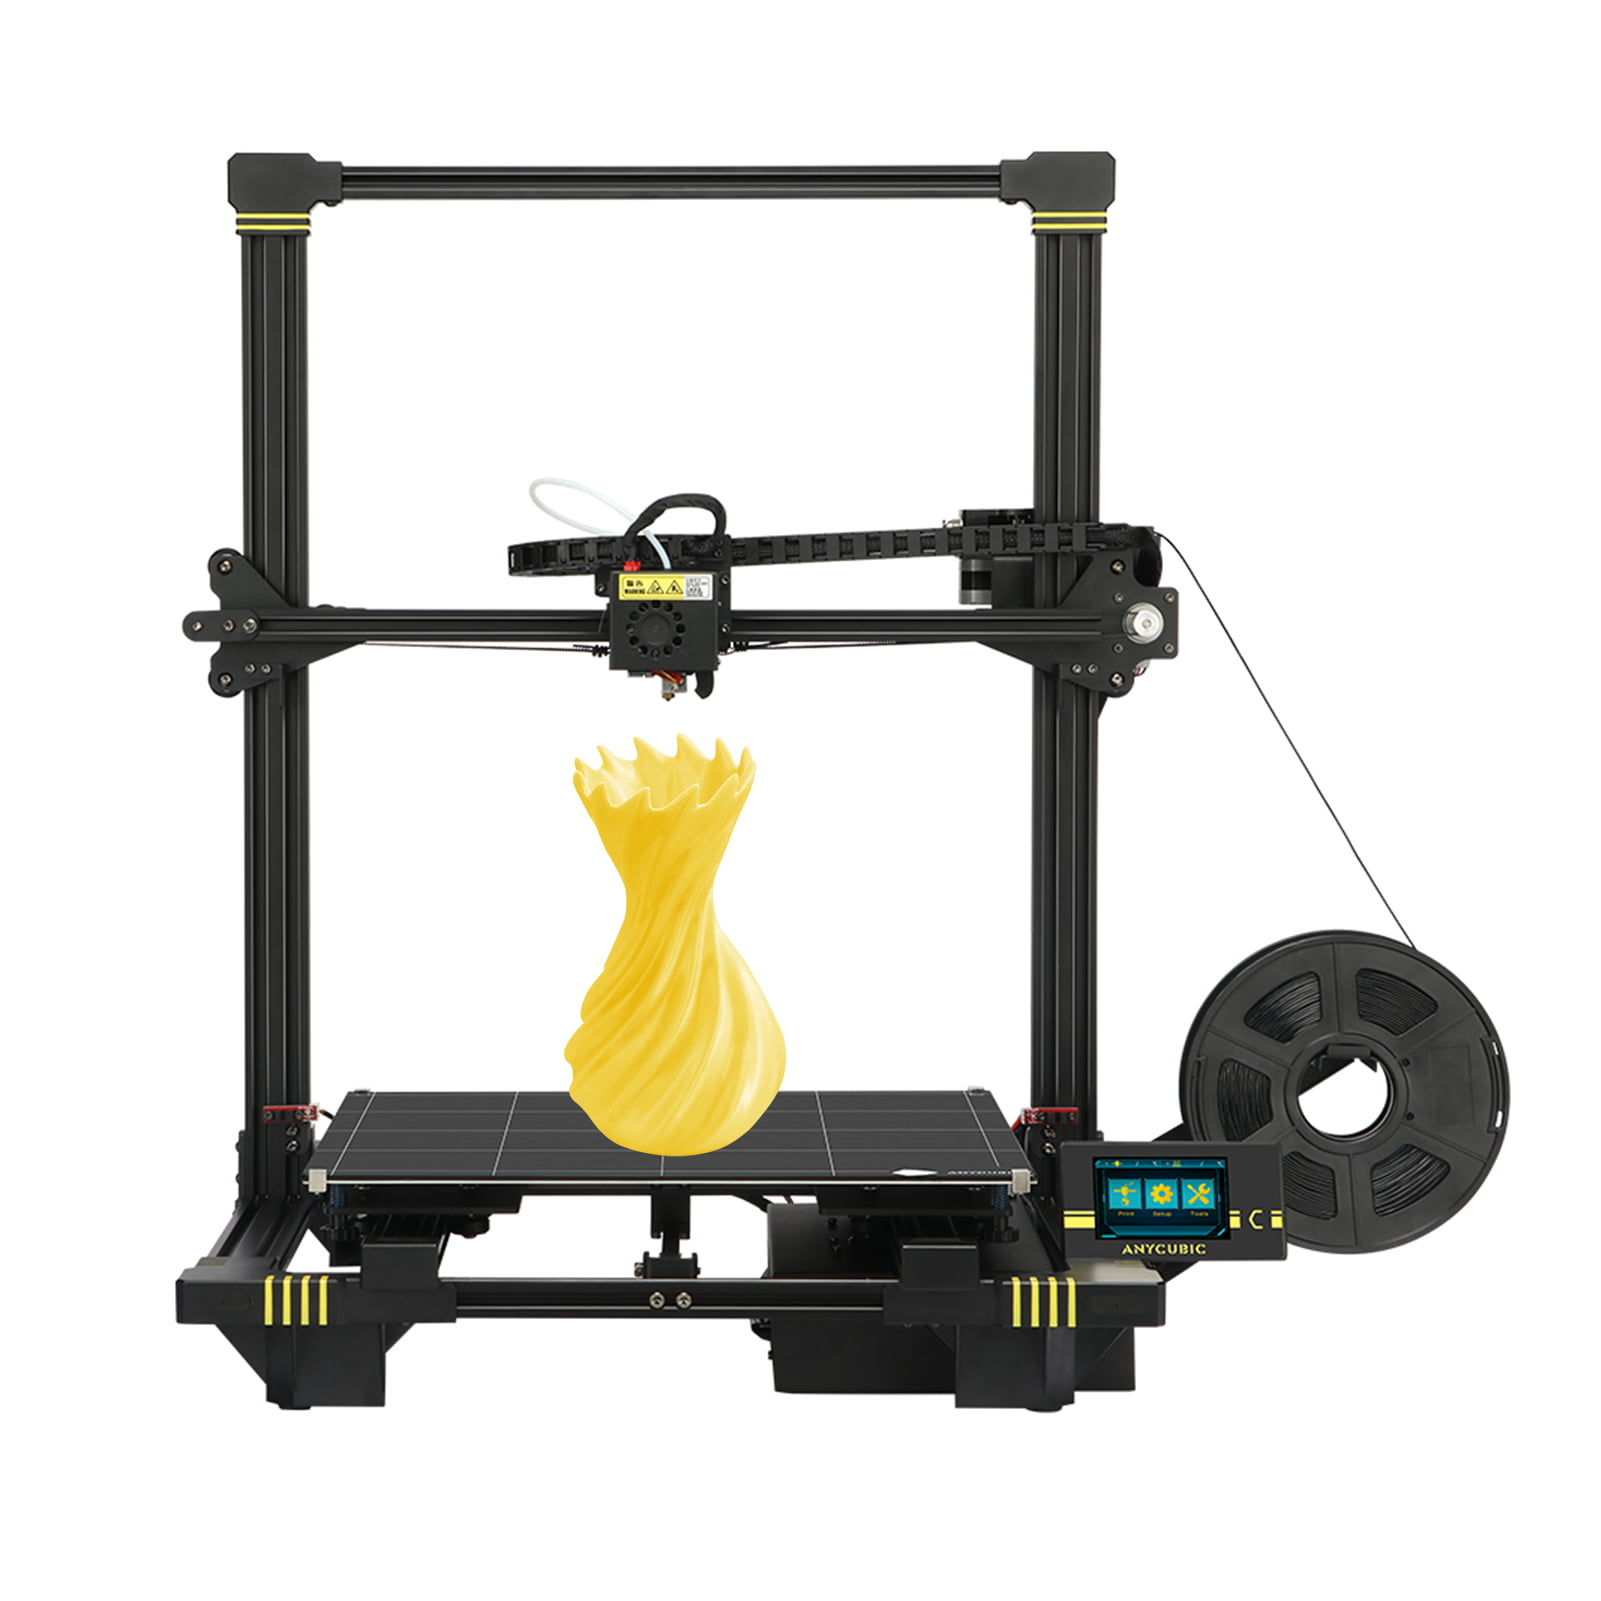 ANYCUBIC ANYCUBIC Chiron Stampante 3D Printer 400*400*450mm Support PLA TPU ABS 